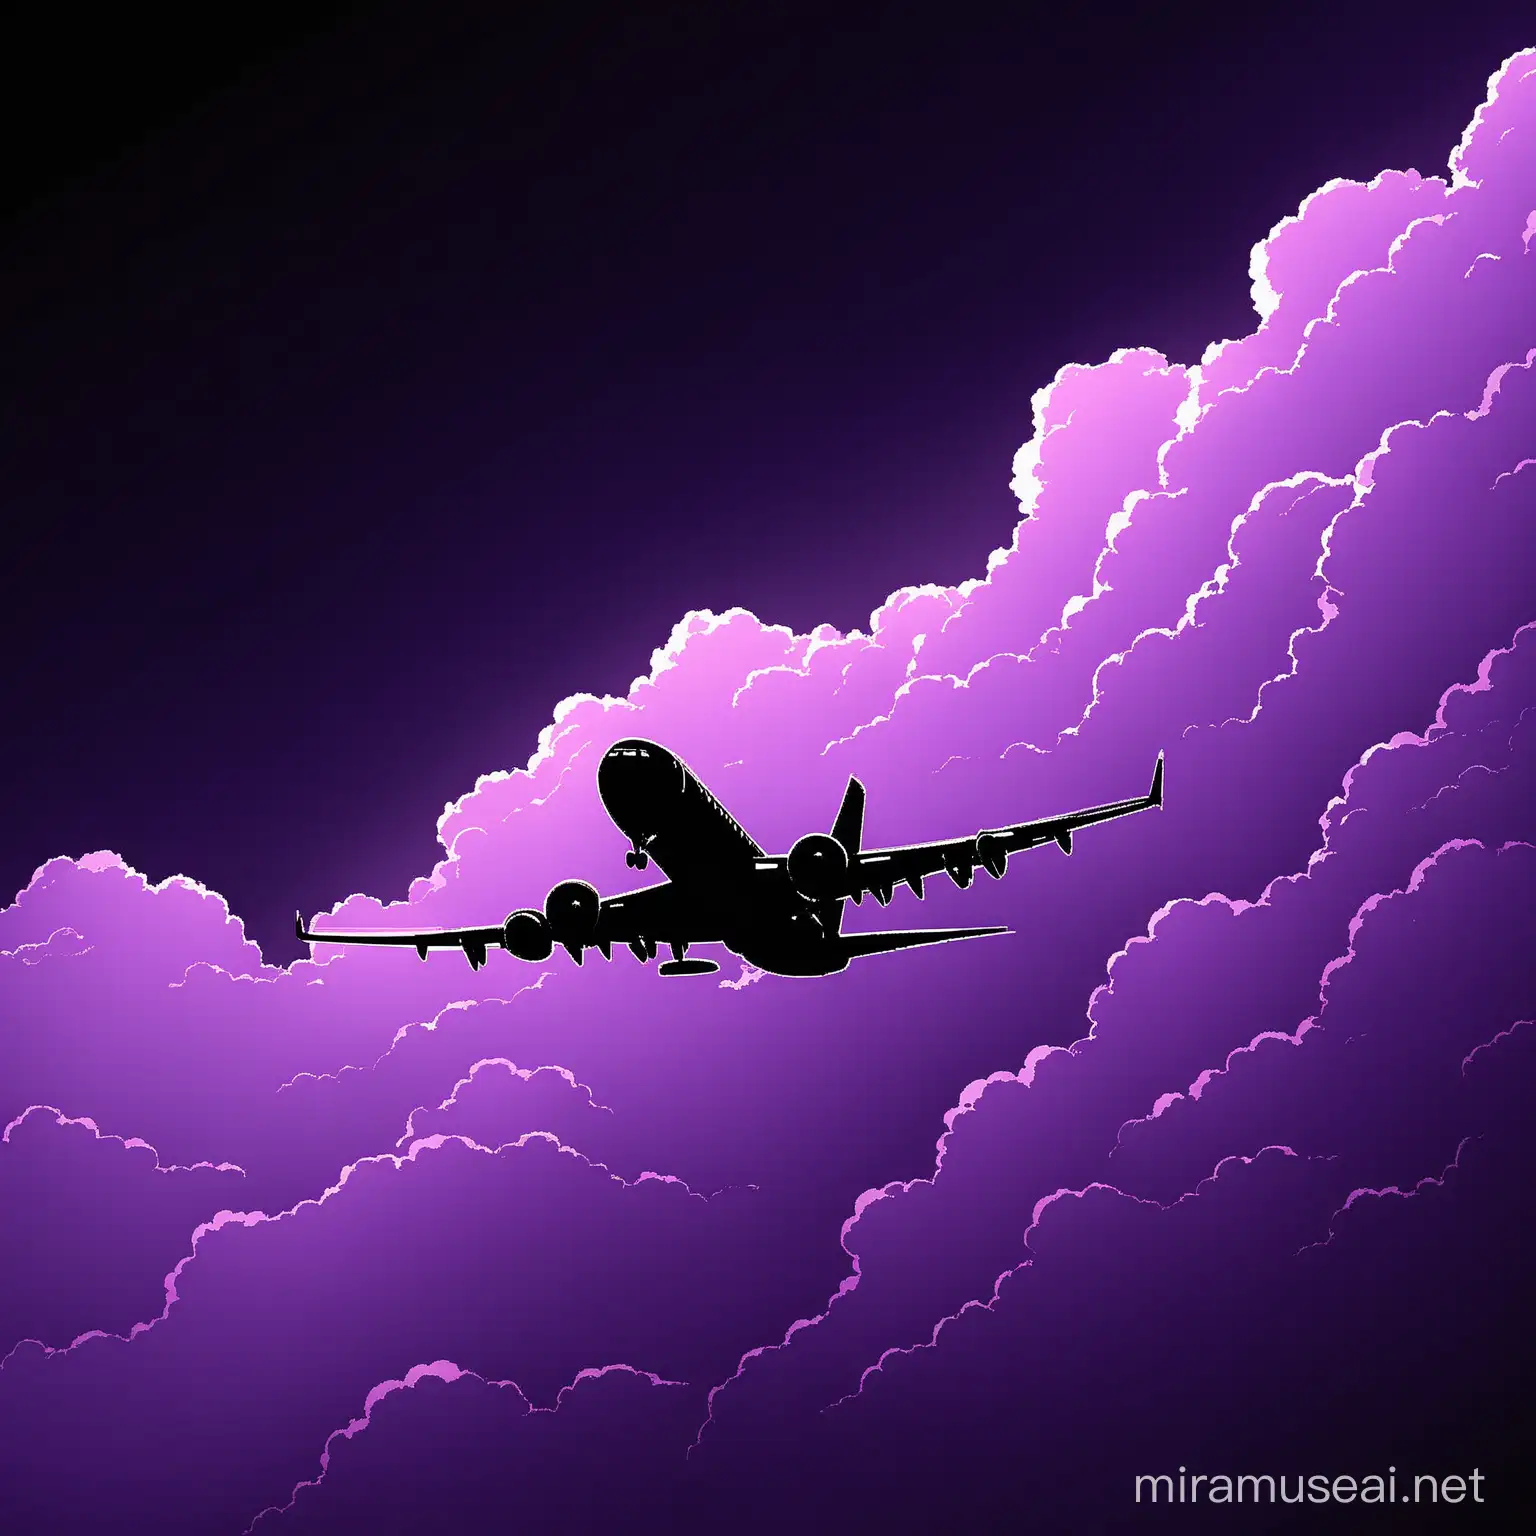 Airplane Soaring Through Purple Clouds with Dark Shadows on Black Background